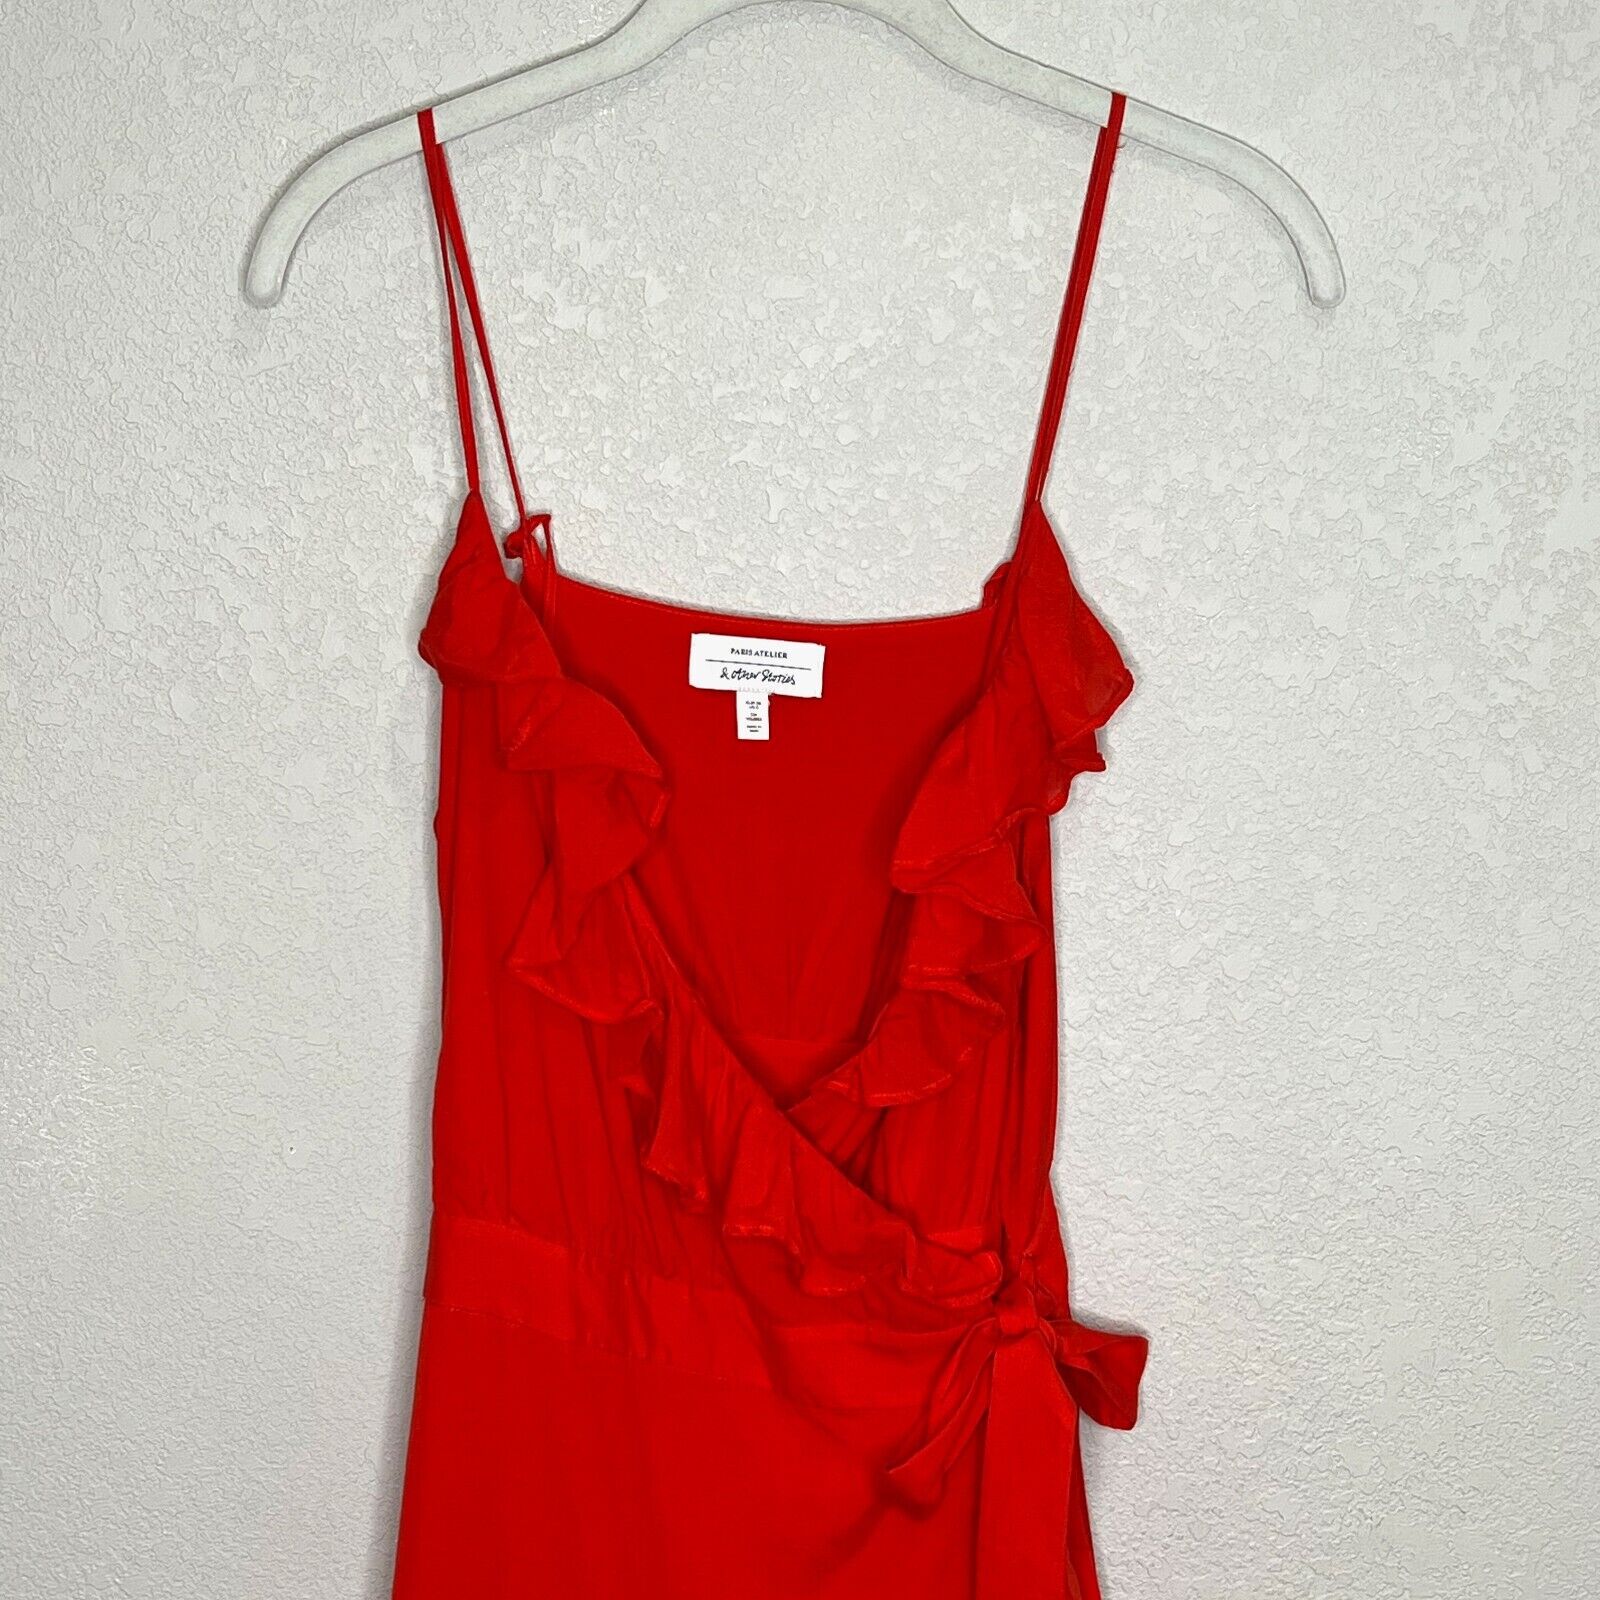 & Other Stories Red Ruffle Wrap Dress Size Size 8